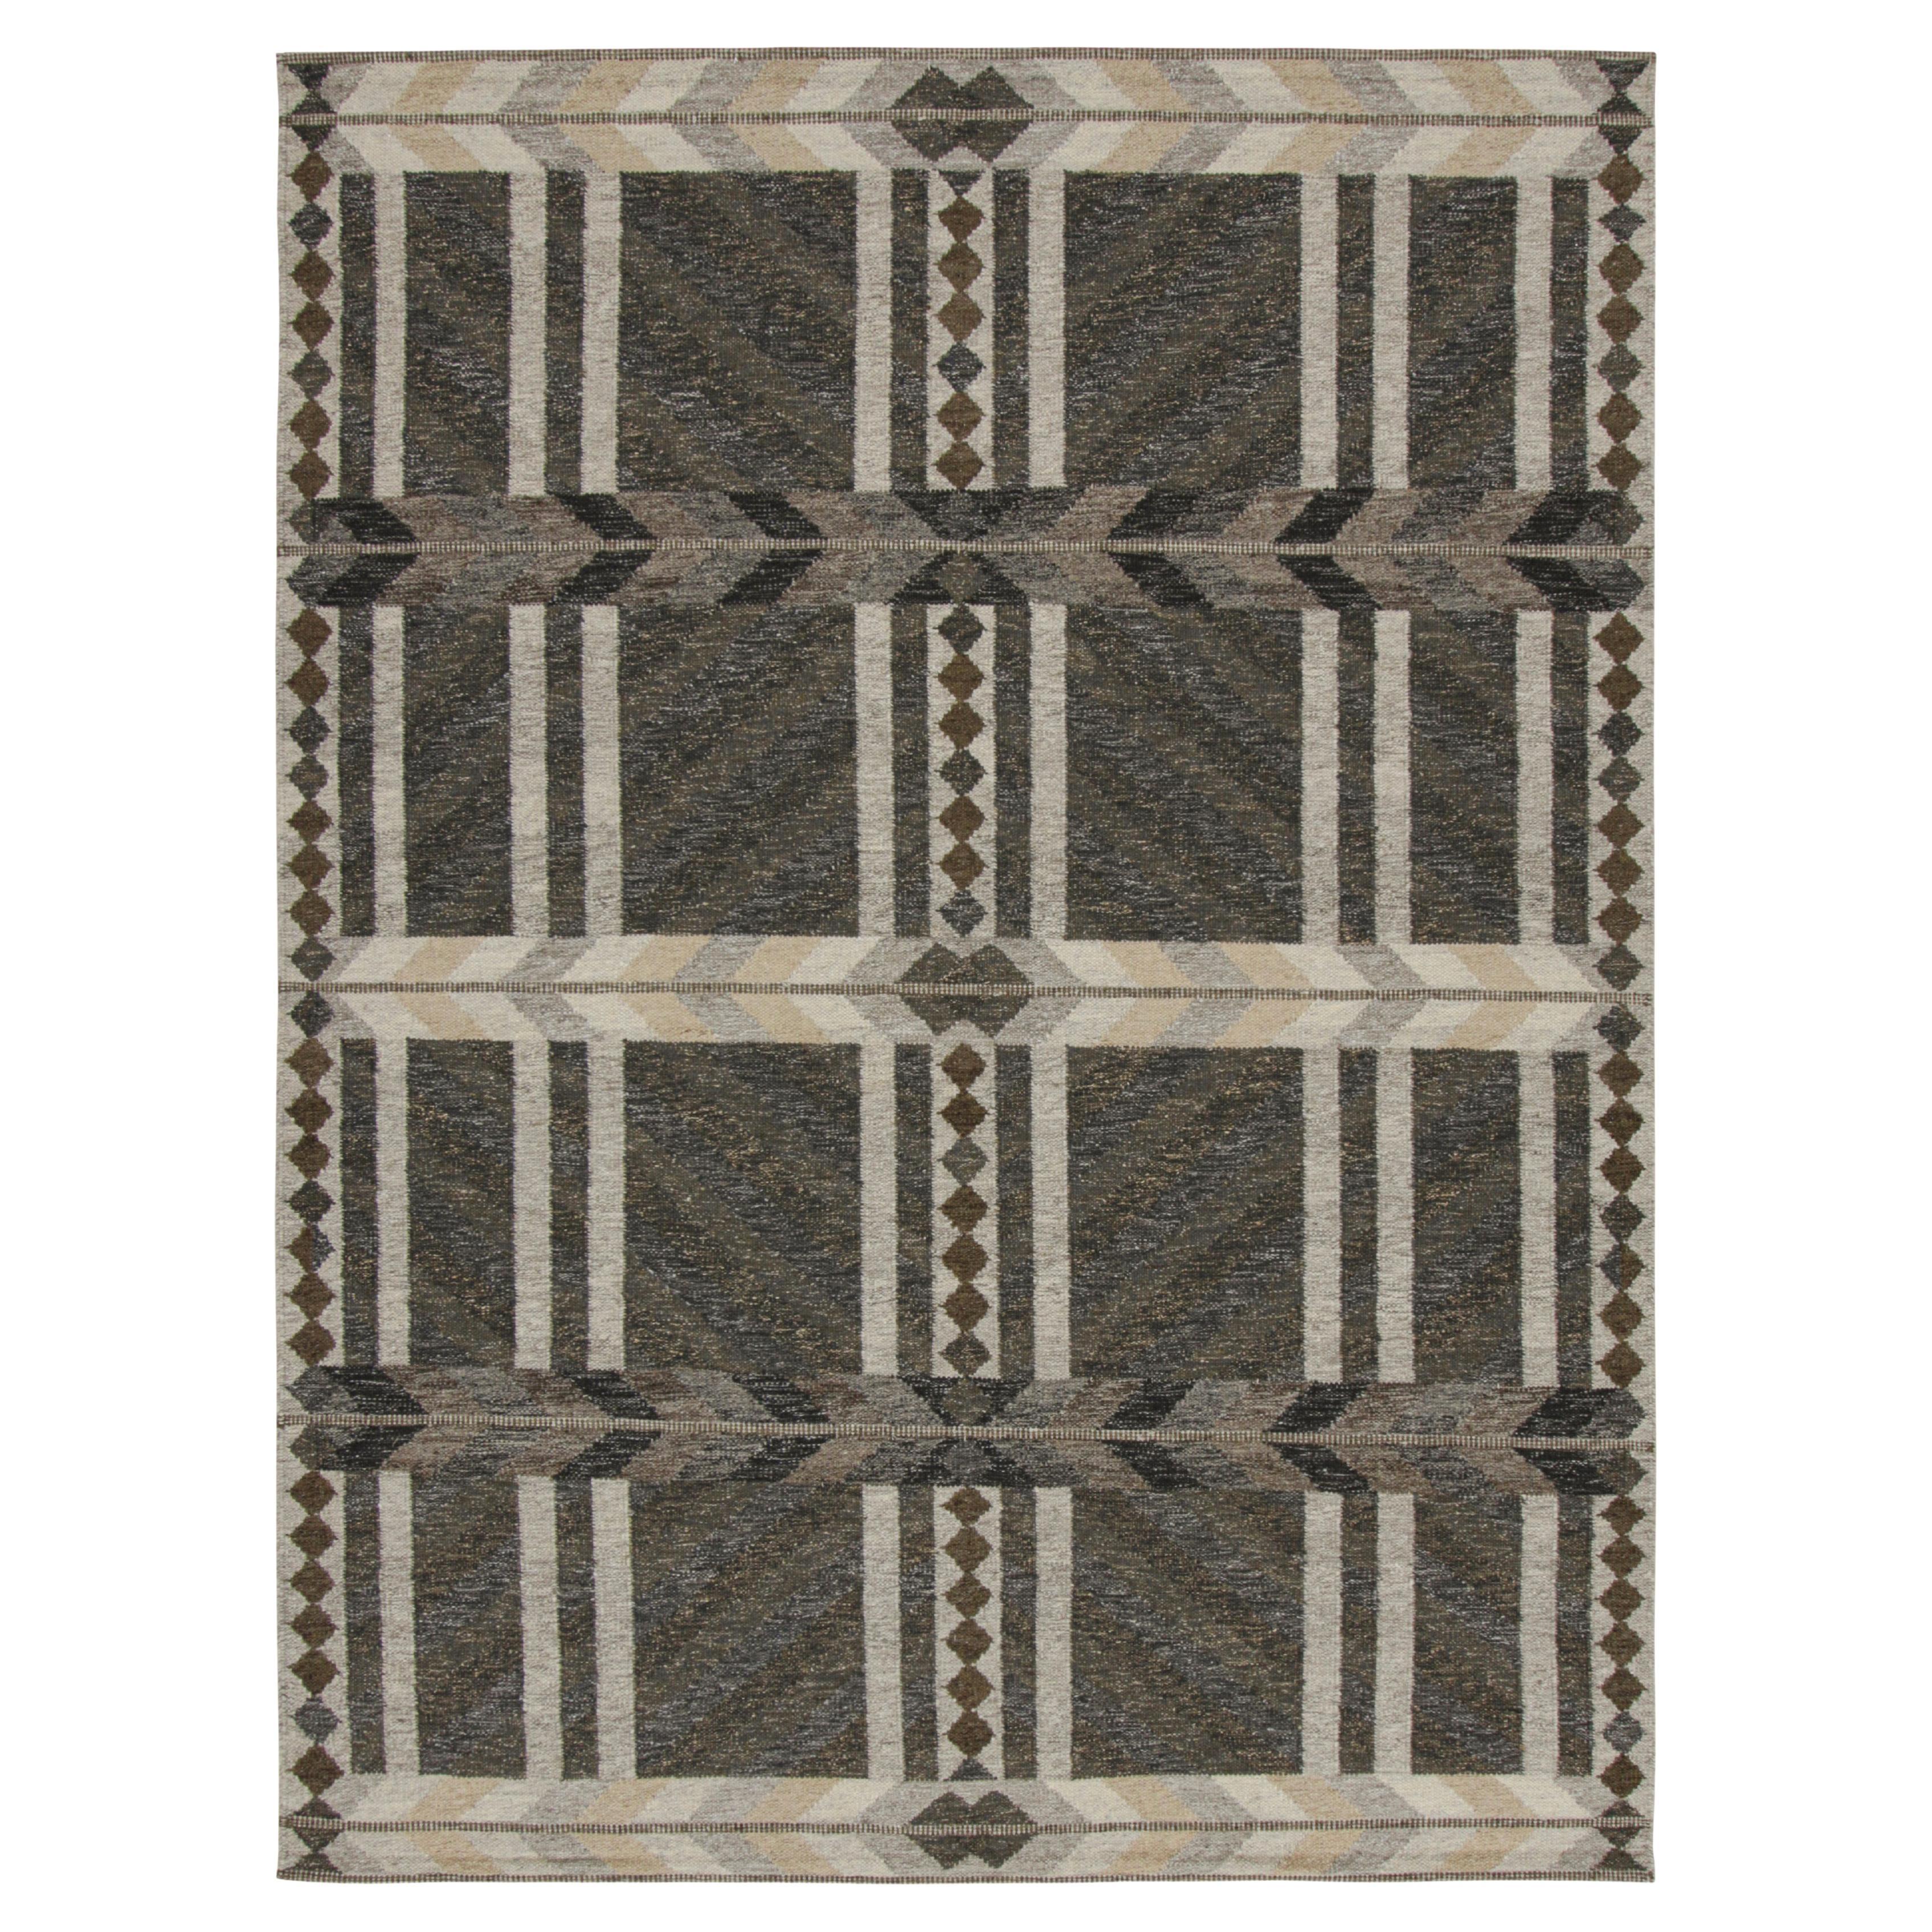 Rug & Kilim’s Scandinavian Style Rug in Gray with Geometric Patterns